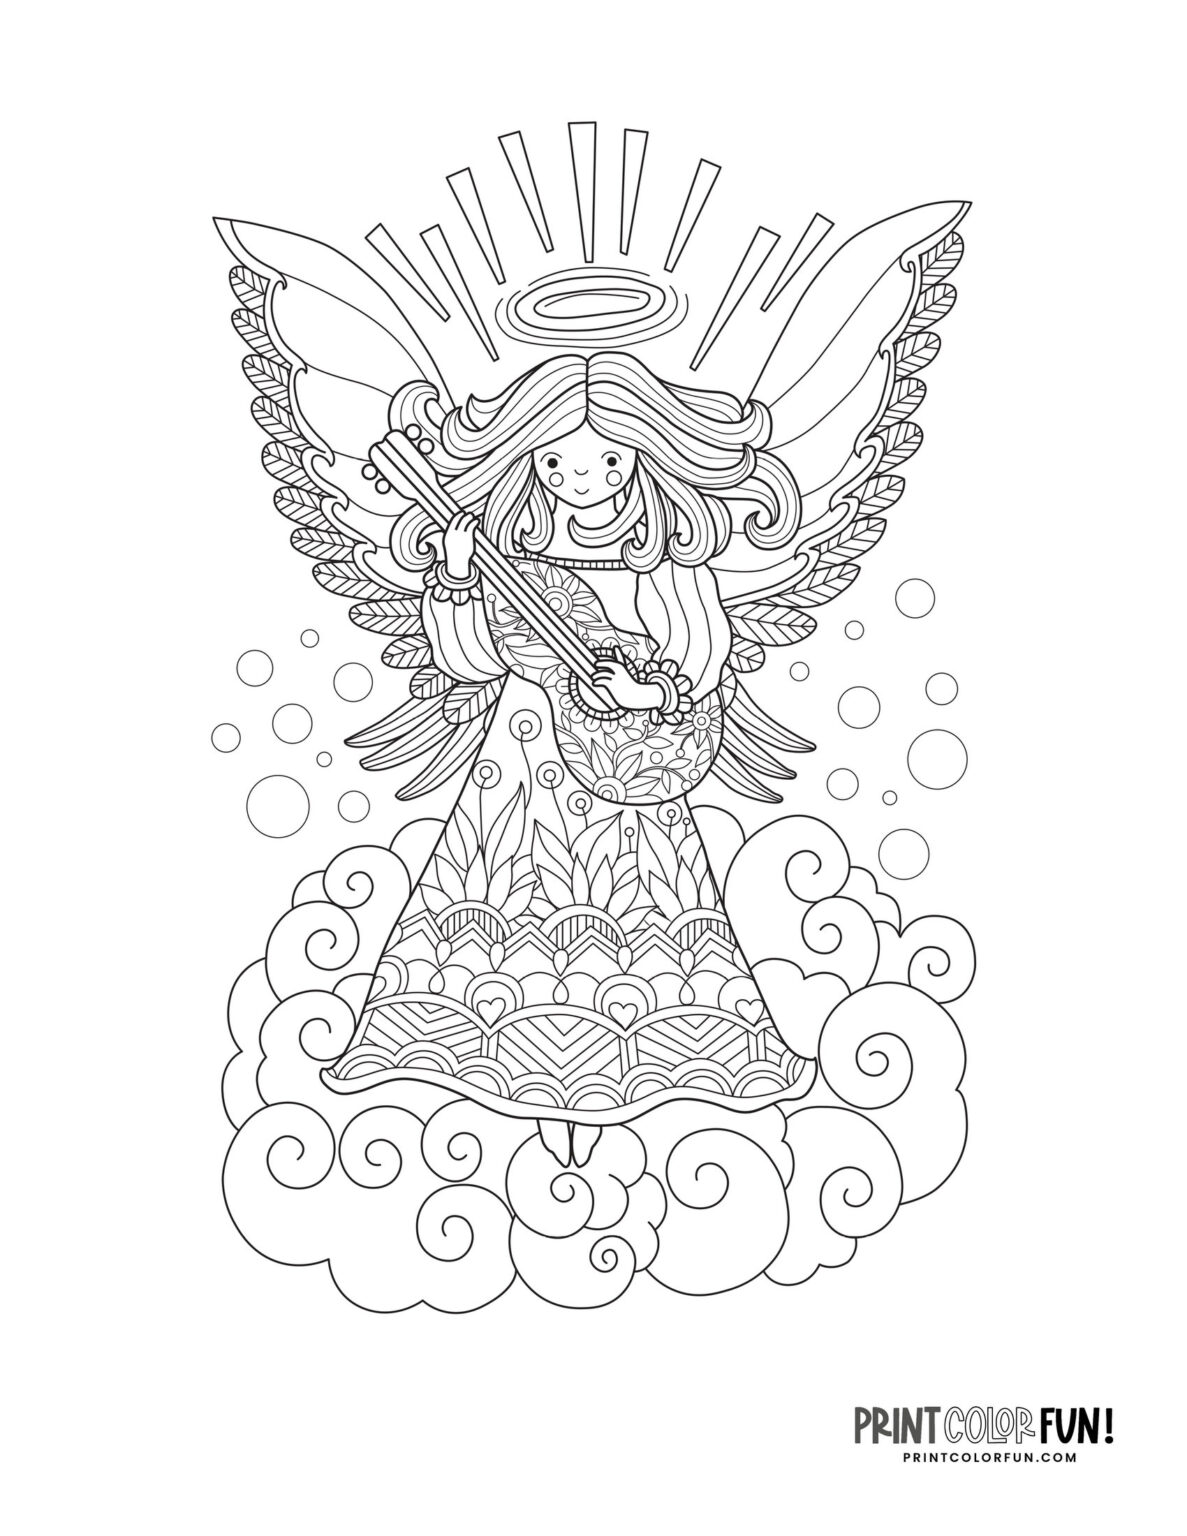 Angel clipart & coloring pages, plus 10 heavenly crafts & activities ...